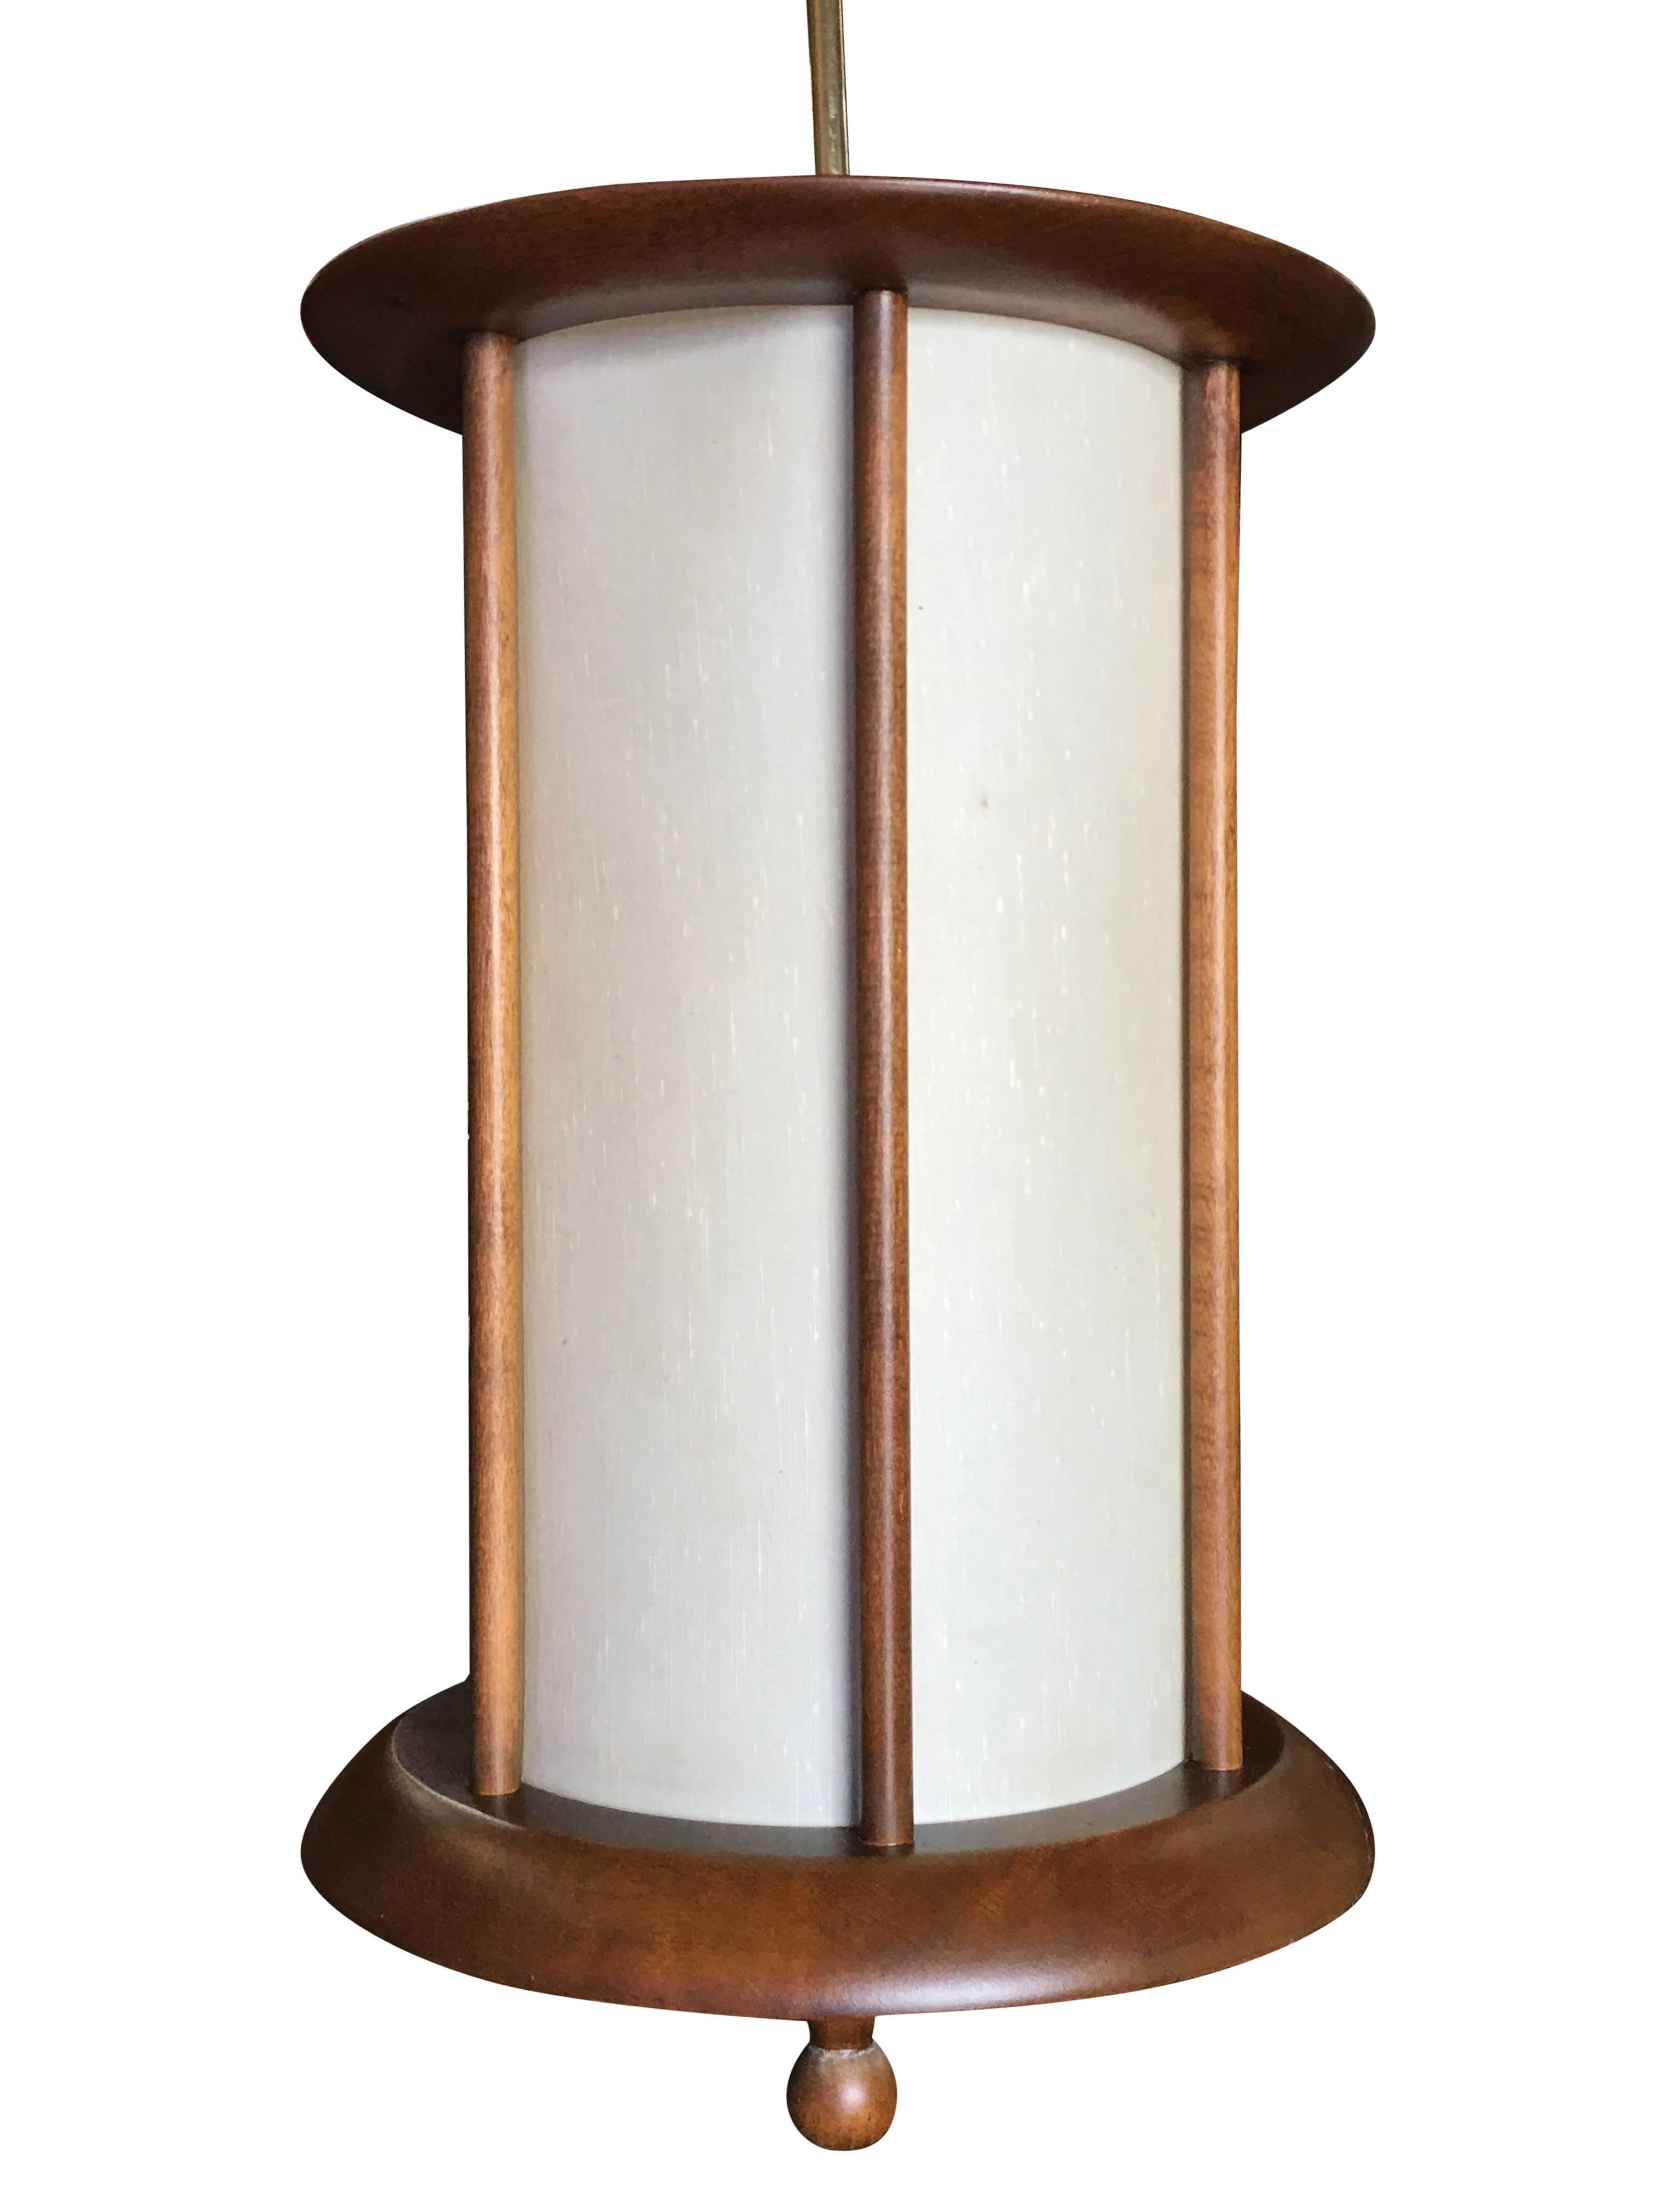 Danish style Mid-Century walnut cylinder pendant with fabric shade and brass hanging rod. This piece is a perfect compliment to a modernist home with its simple lines, elegant stance and earthy combination of brass, walnut, and fabric.